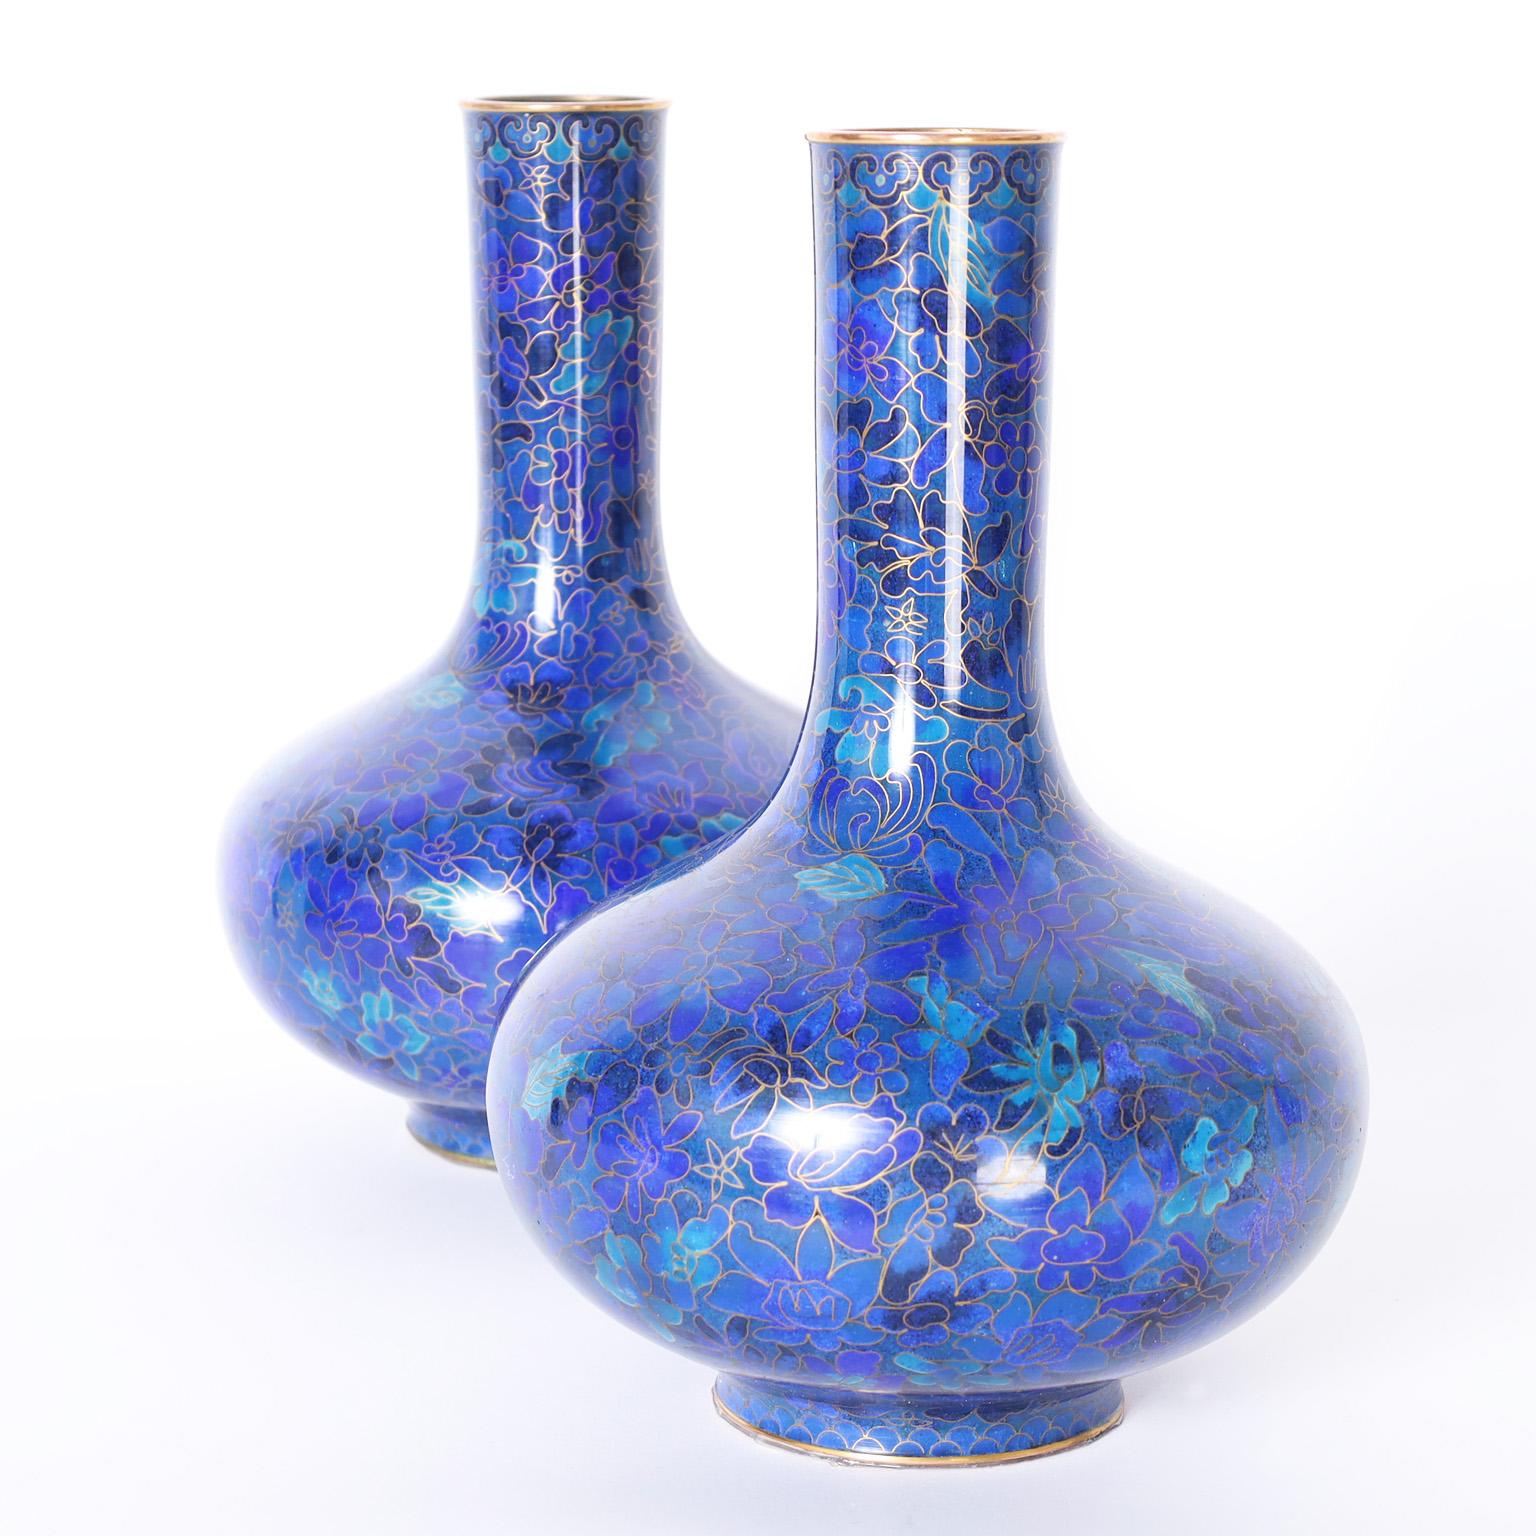 Striking in their beauty a pair of vintage Chinese cloisonne vases with classic form and featuring alluring blue floral designs. JINGFA label on the bottom.